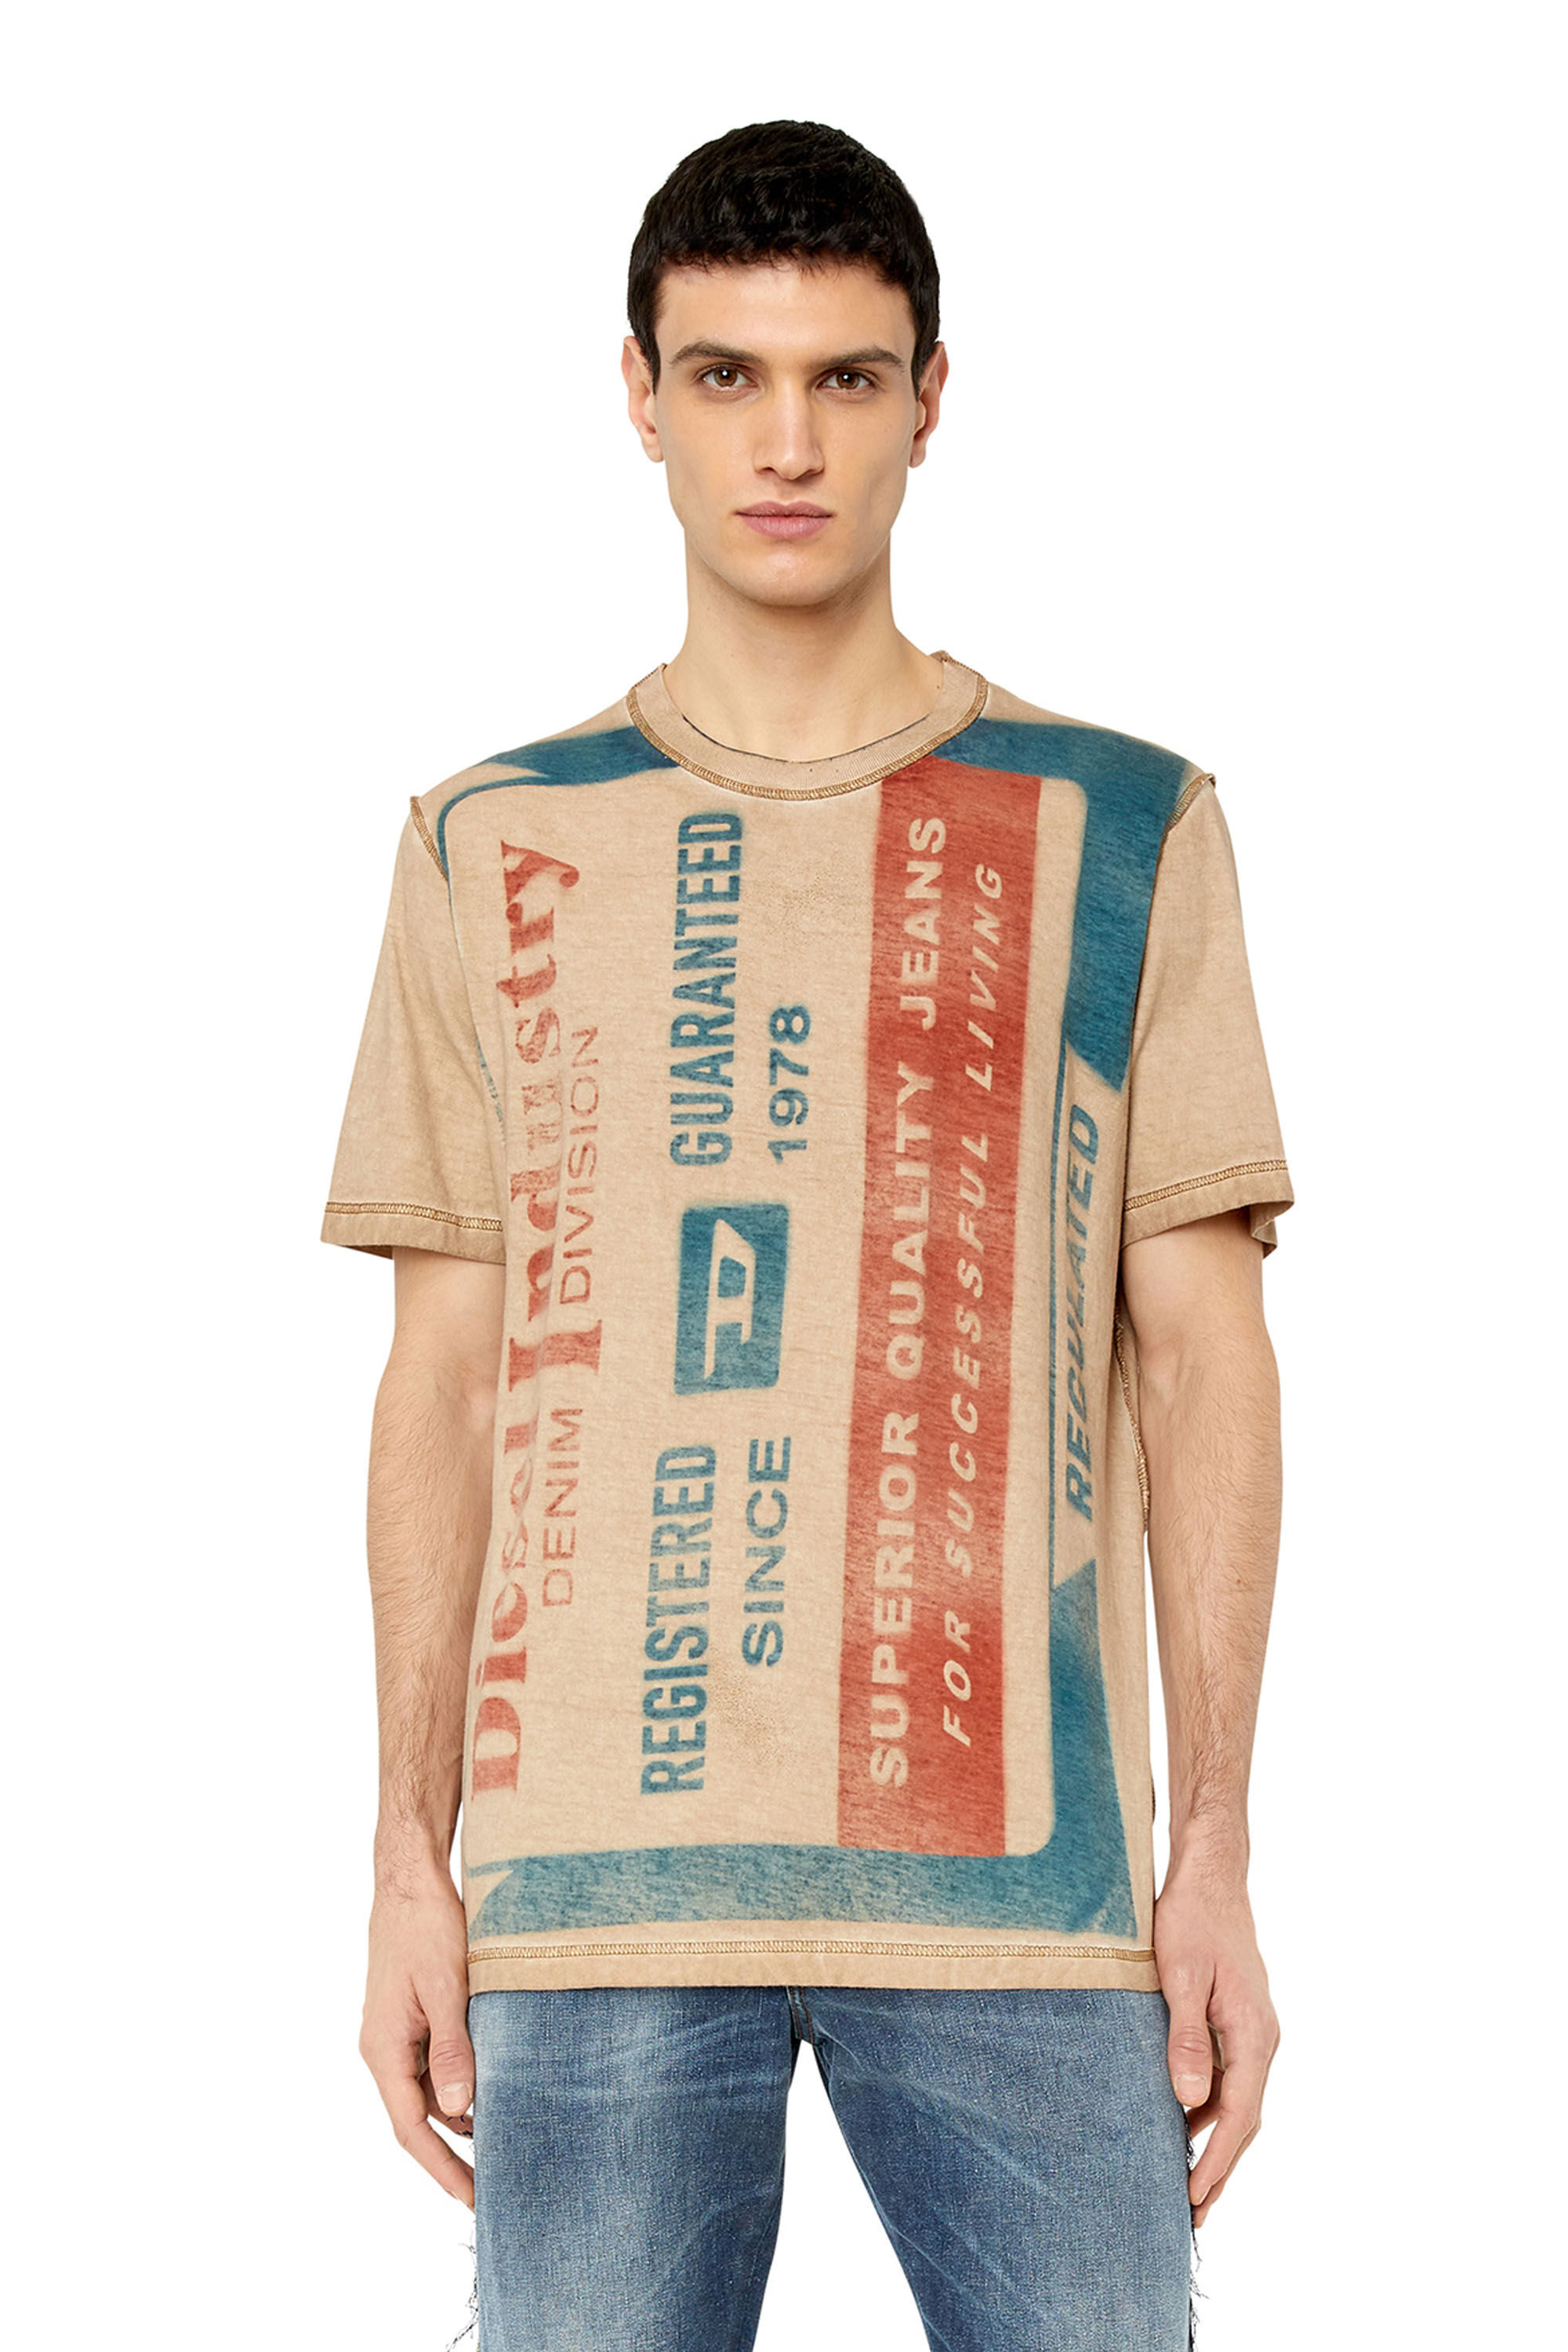 T-JUST-G13 Man: T-shirt with jacron patch print | Diesel